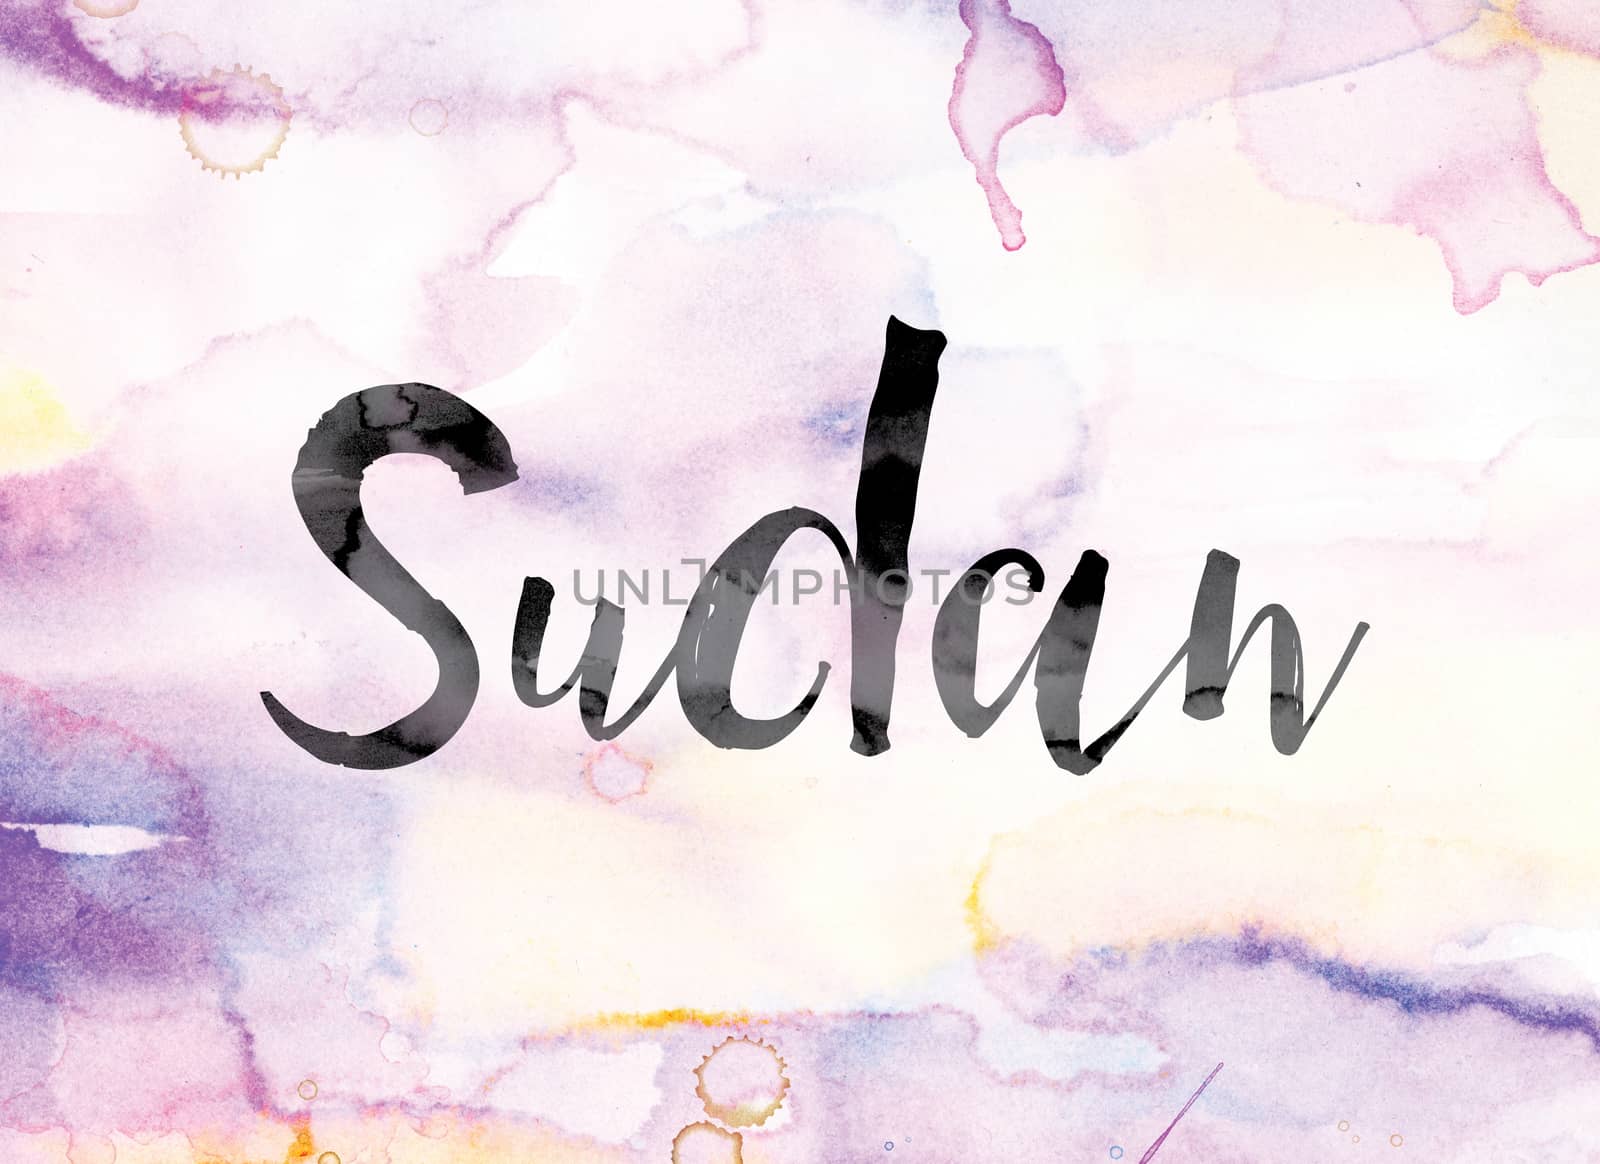 Sudan Colorful Watercolor and Ink Word Art by enterlinedesign